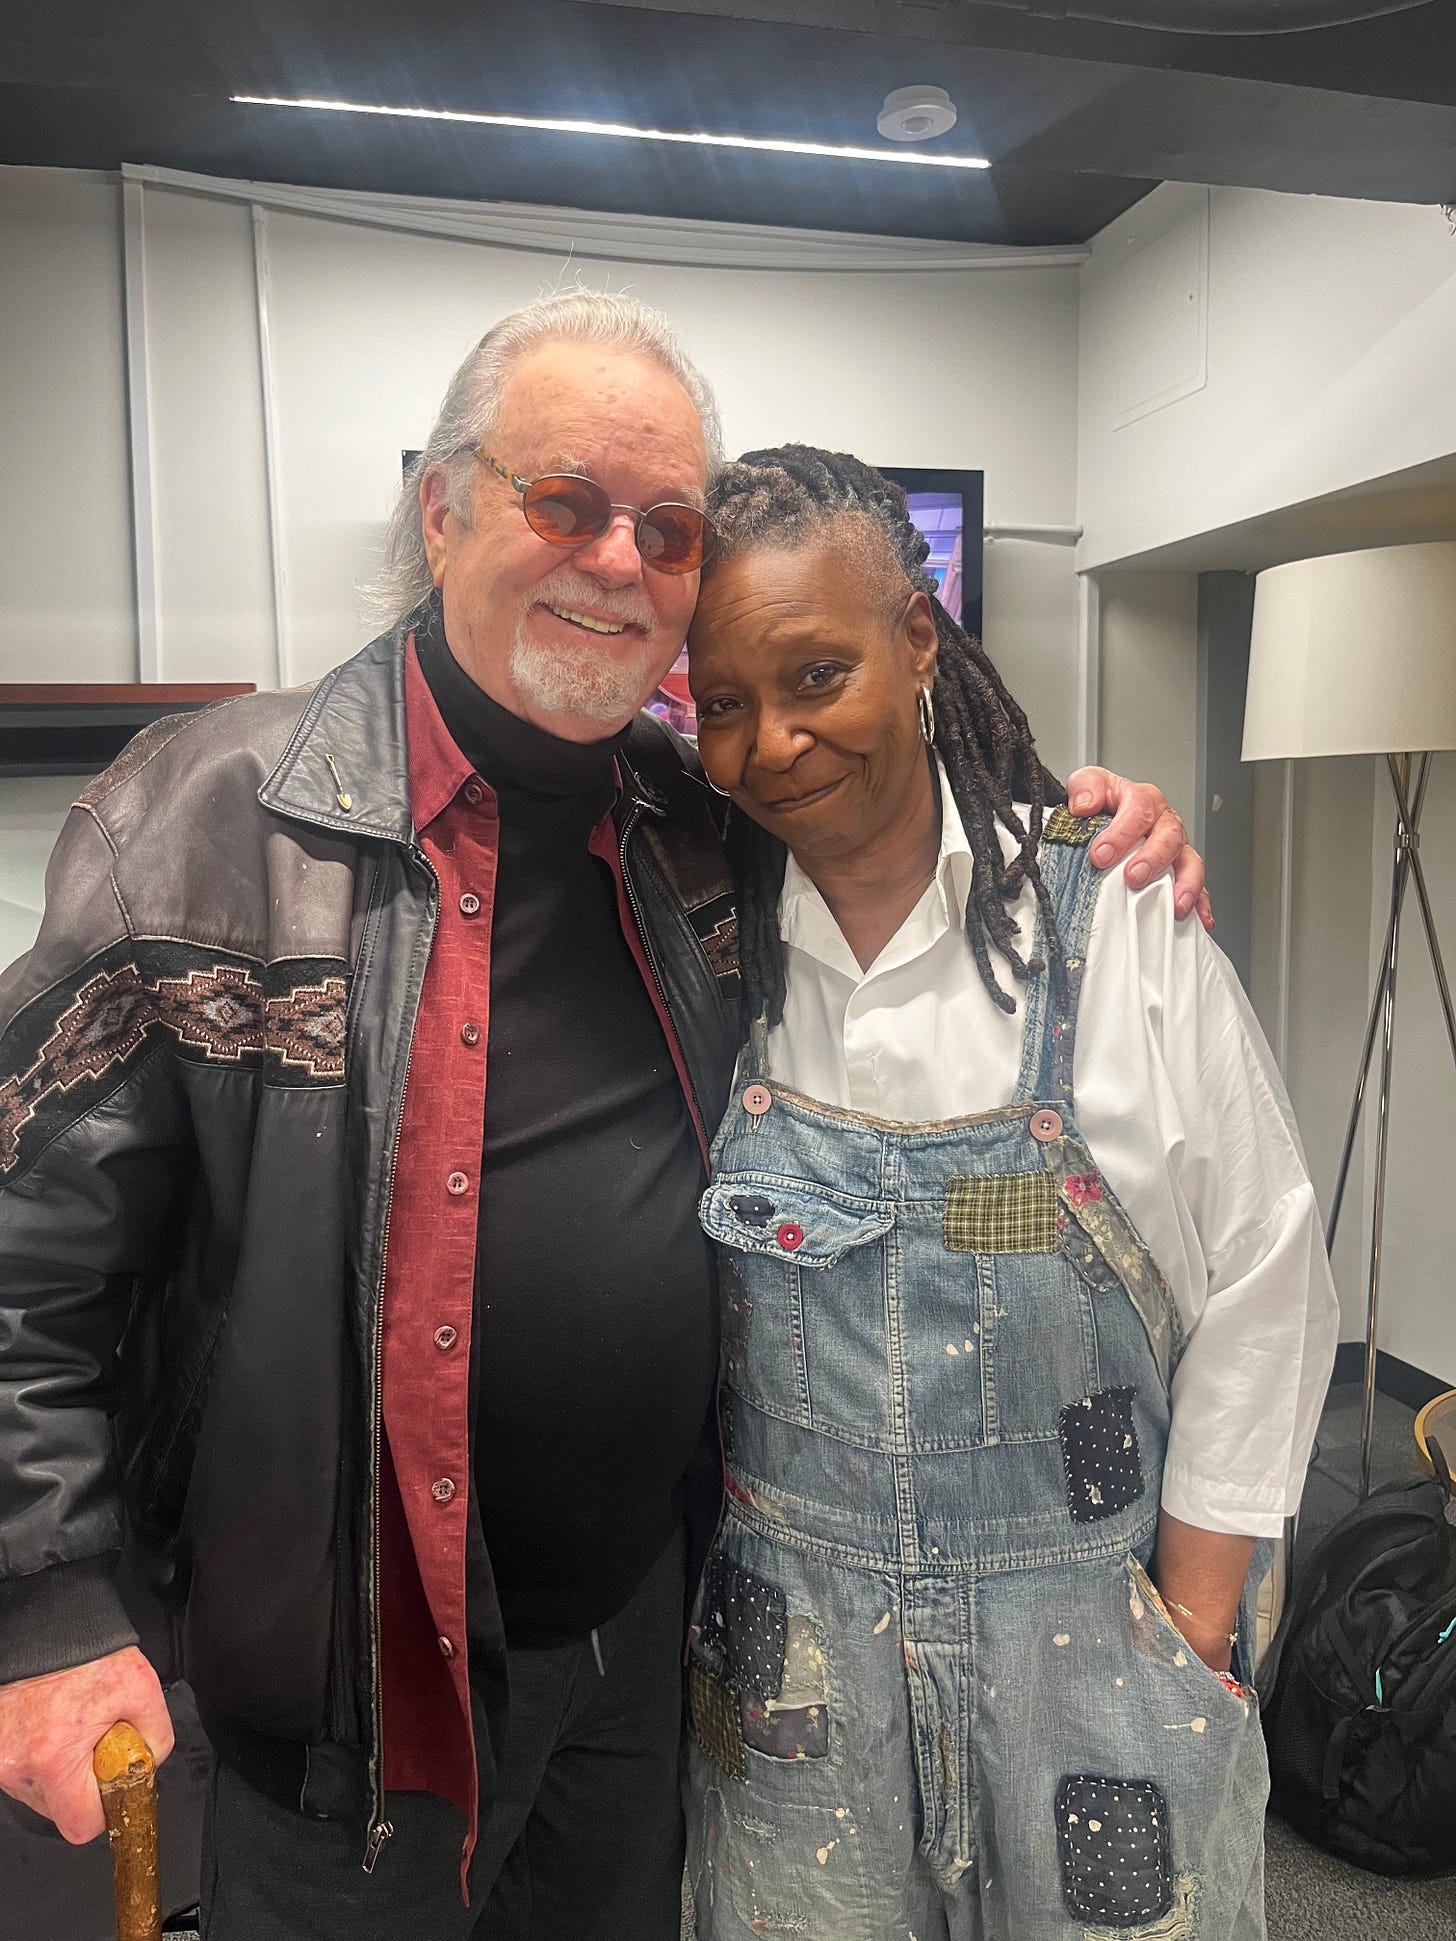 Russ Tamblyn and Whoopi Goldberg pose together in "The View" greenroom. 